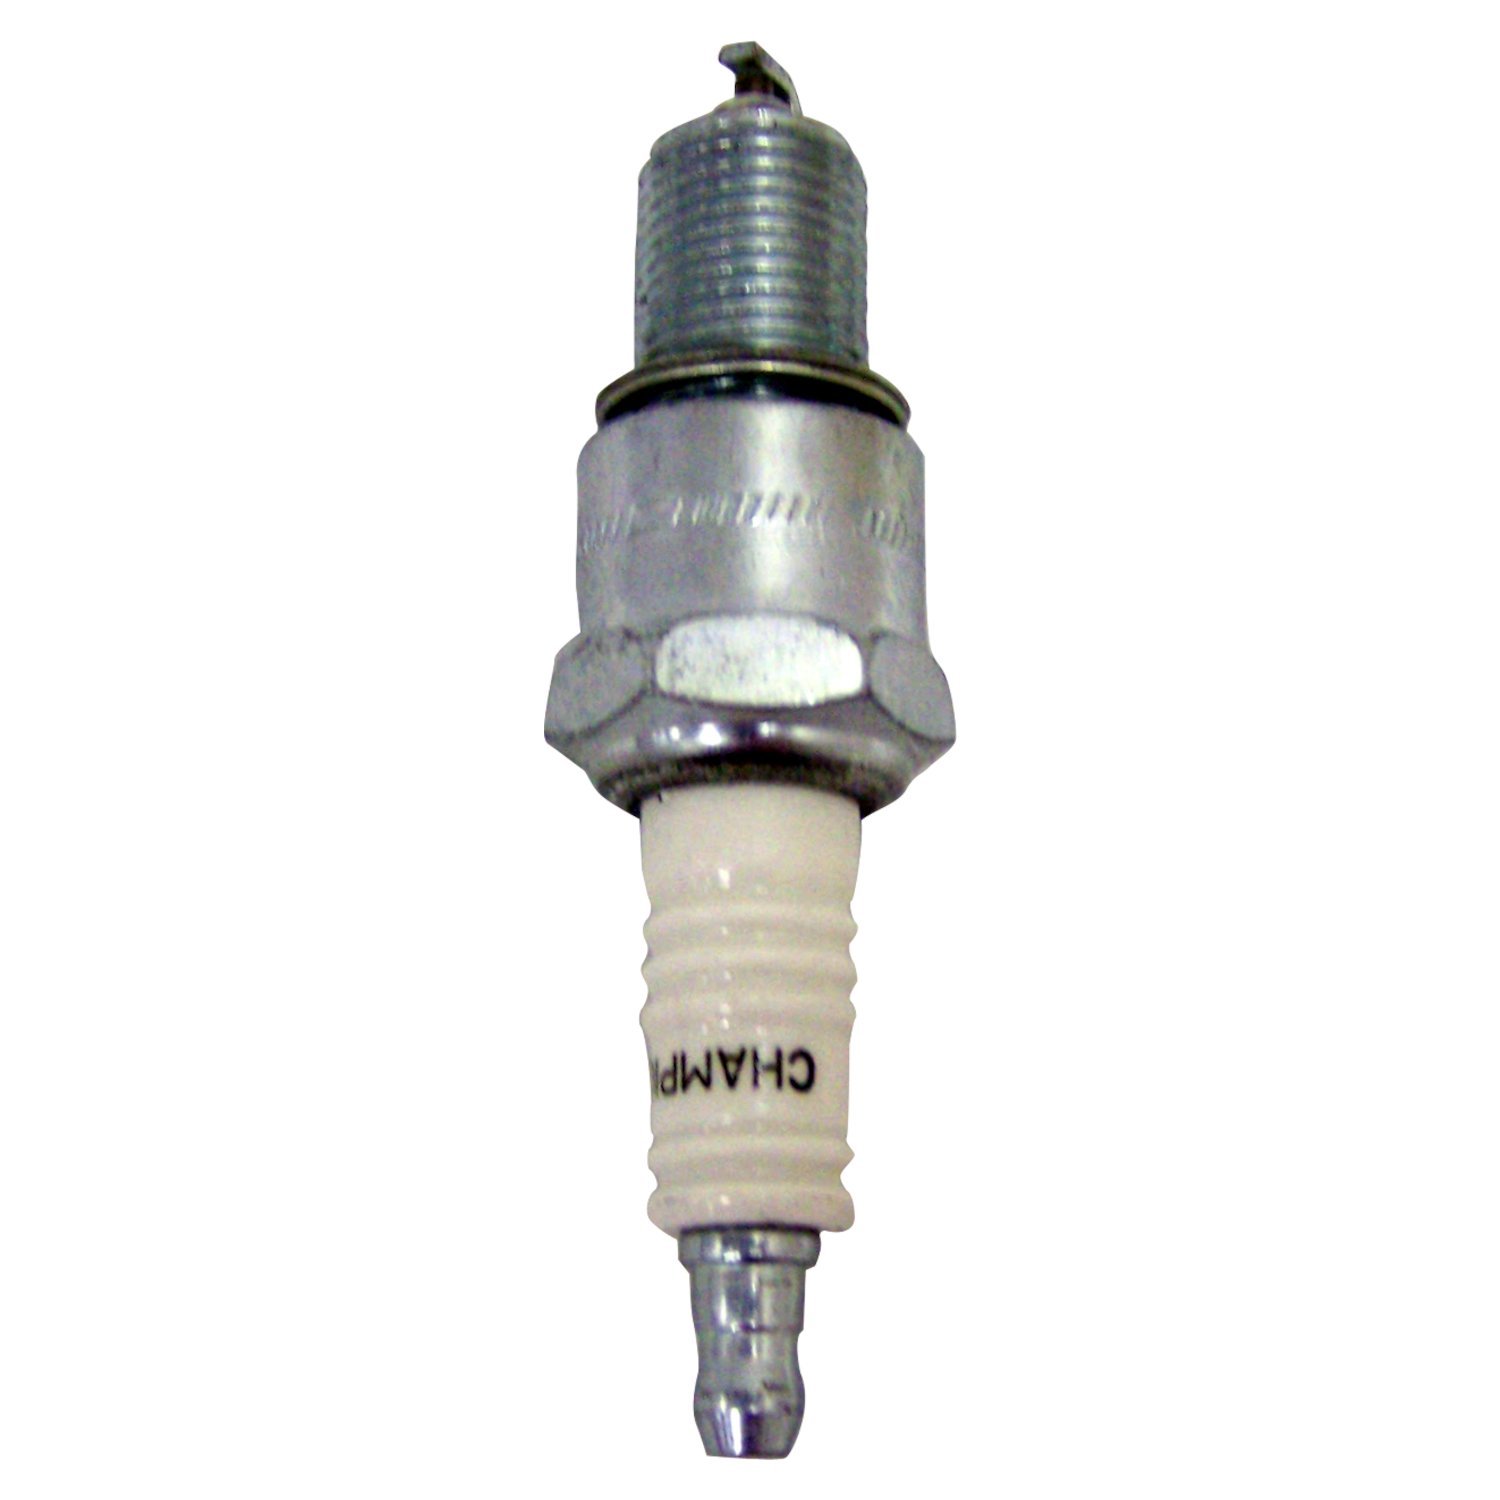 Spark Plug for Misc. 1971-1988 Jeep Vehicles w/ 3.8L, 4.2L, 5.0L or 5.9L Engs.